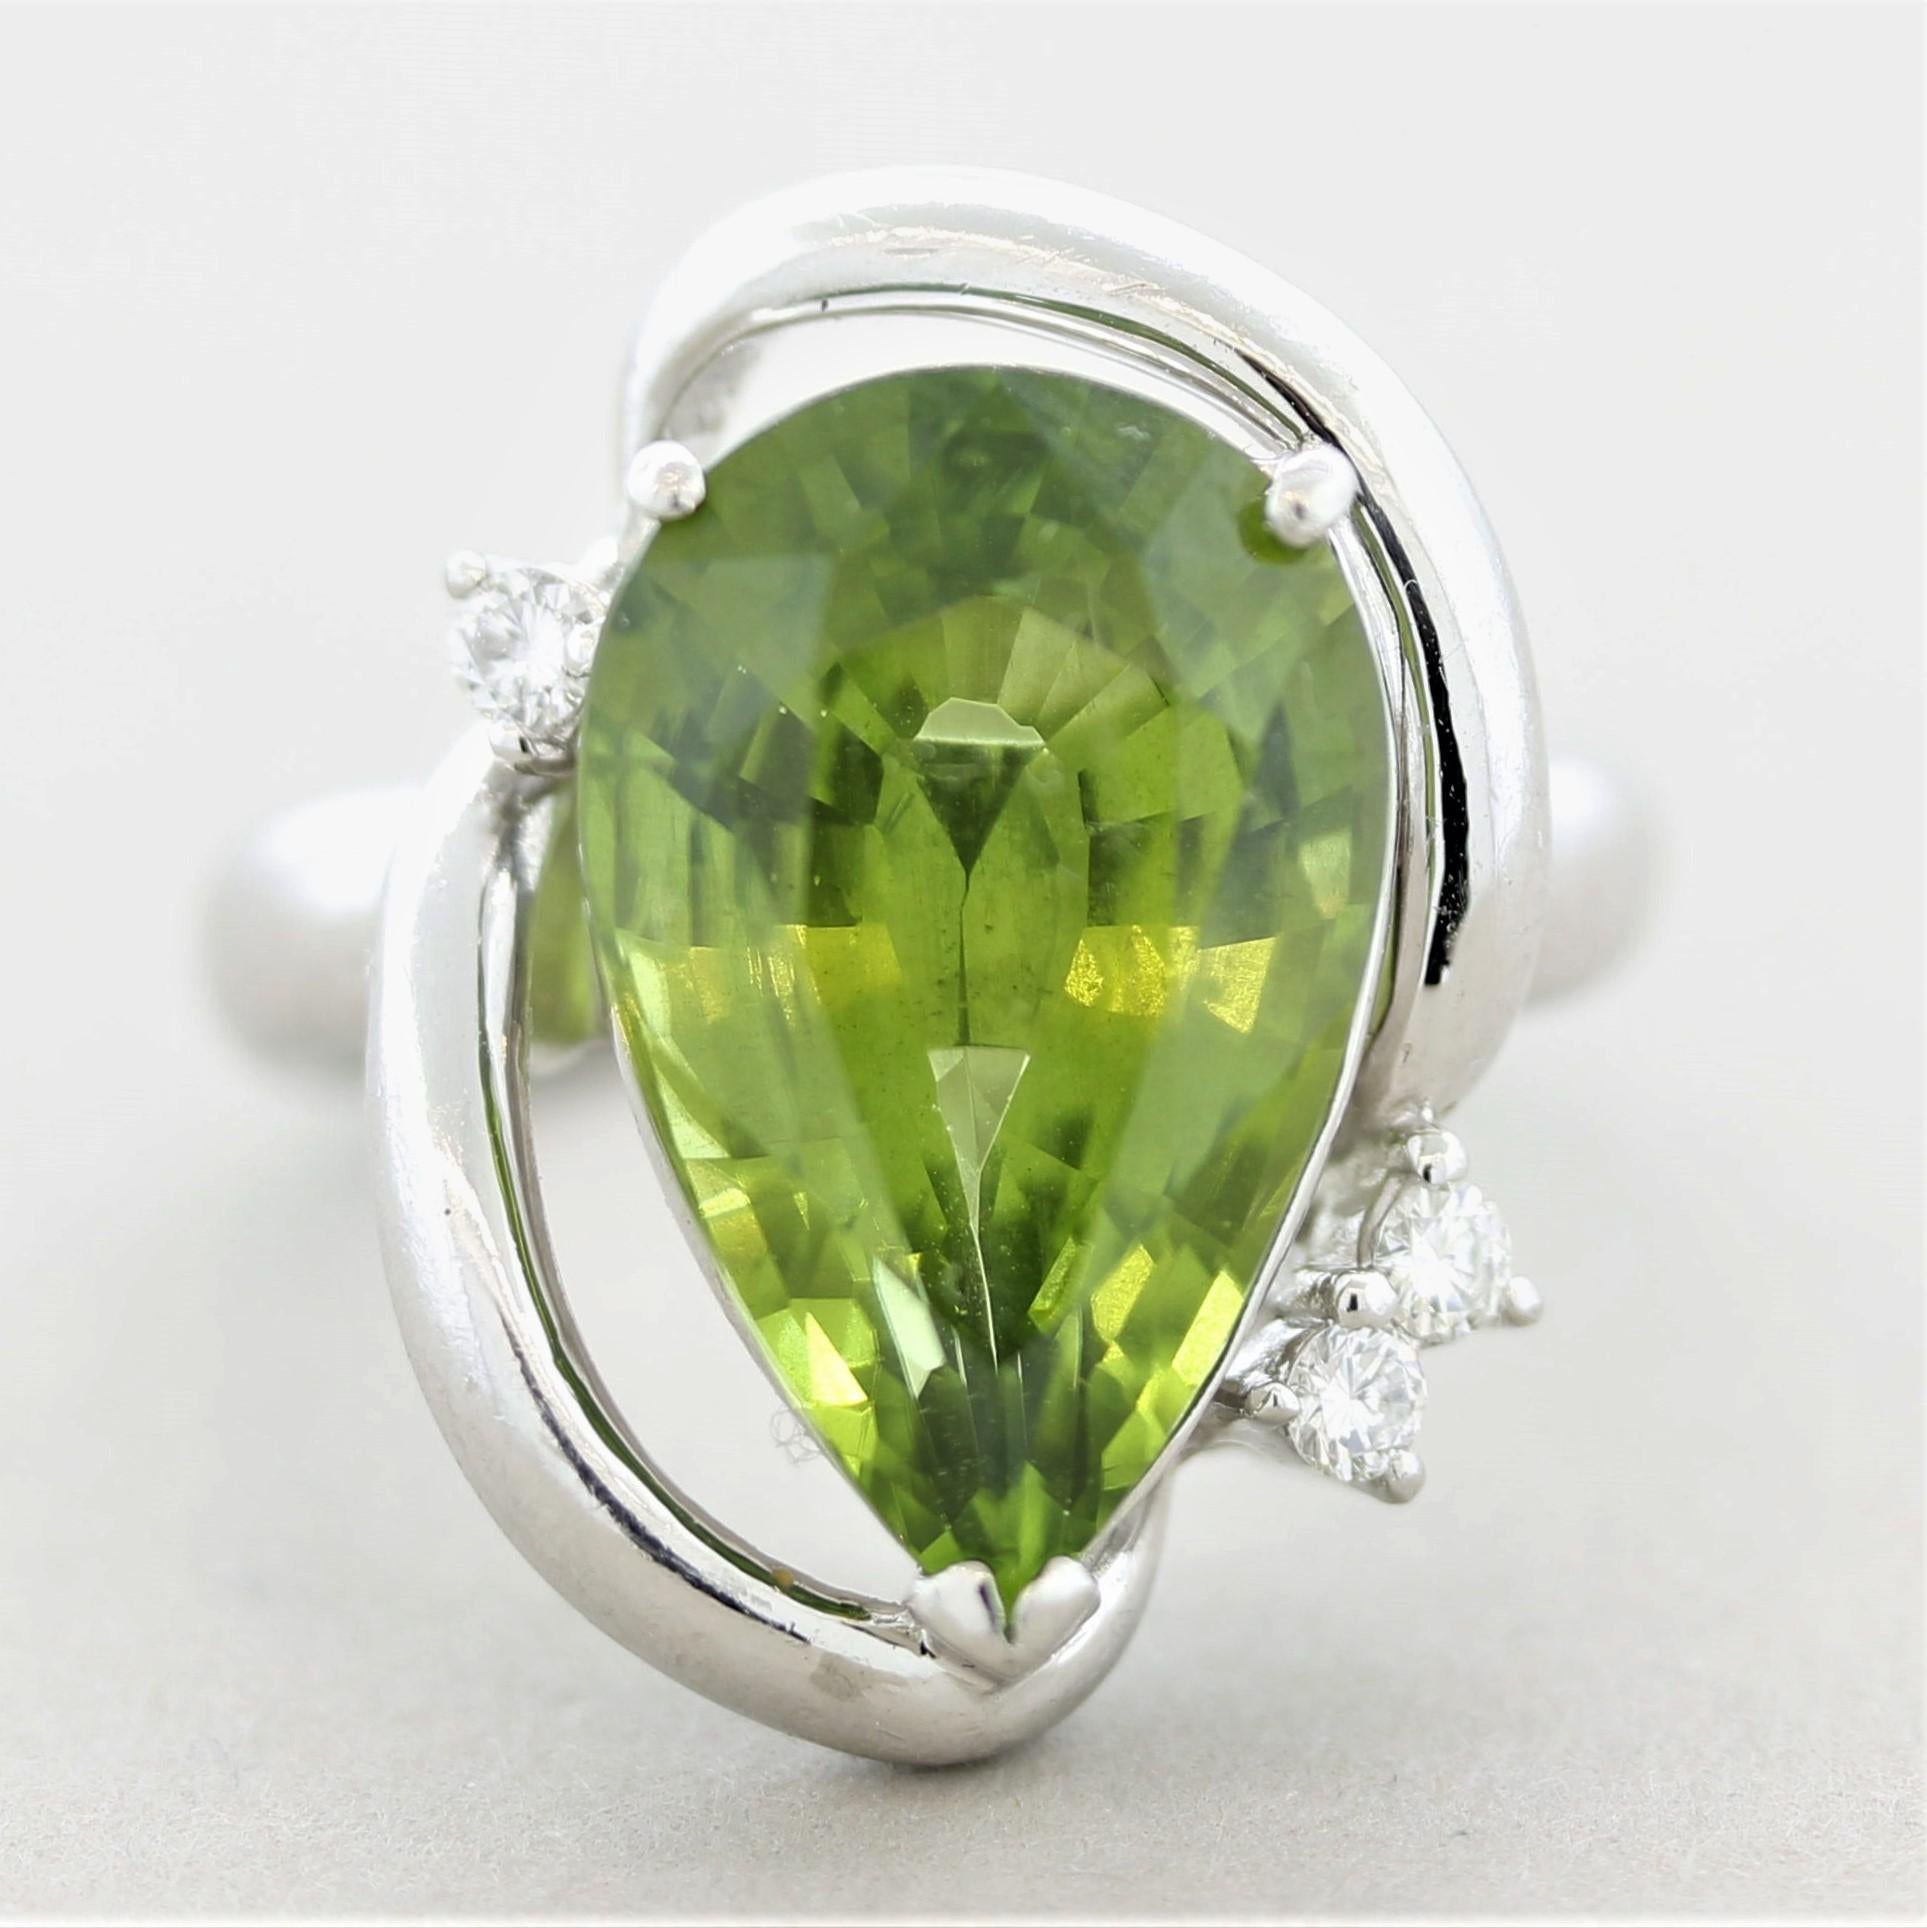 A unique designed platinum ring featuring a large and impressive peridot! The peridot weighs 10.22 carats, has a beautifully proportioned pear-shape and a bright vivid green color. Accented the peridot are 3 round brilliant-cut diamonds weighing